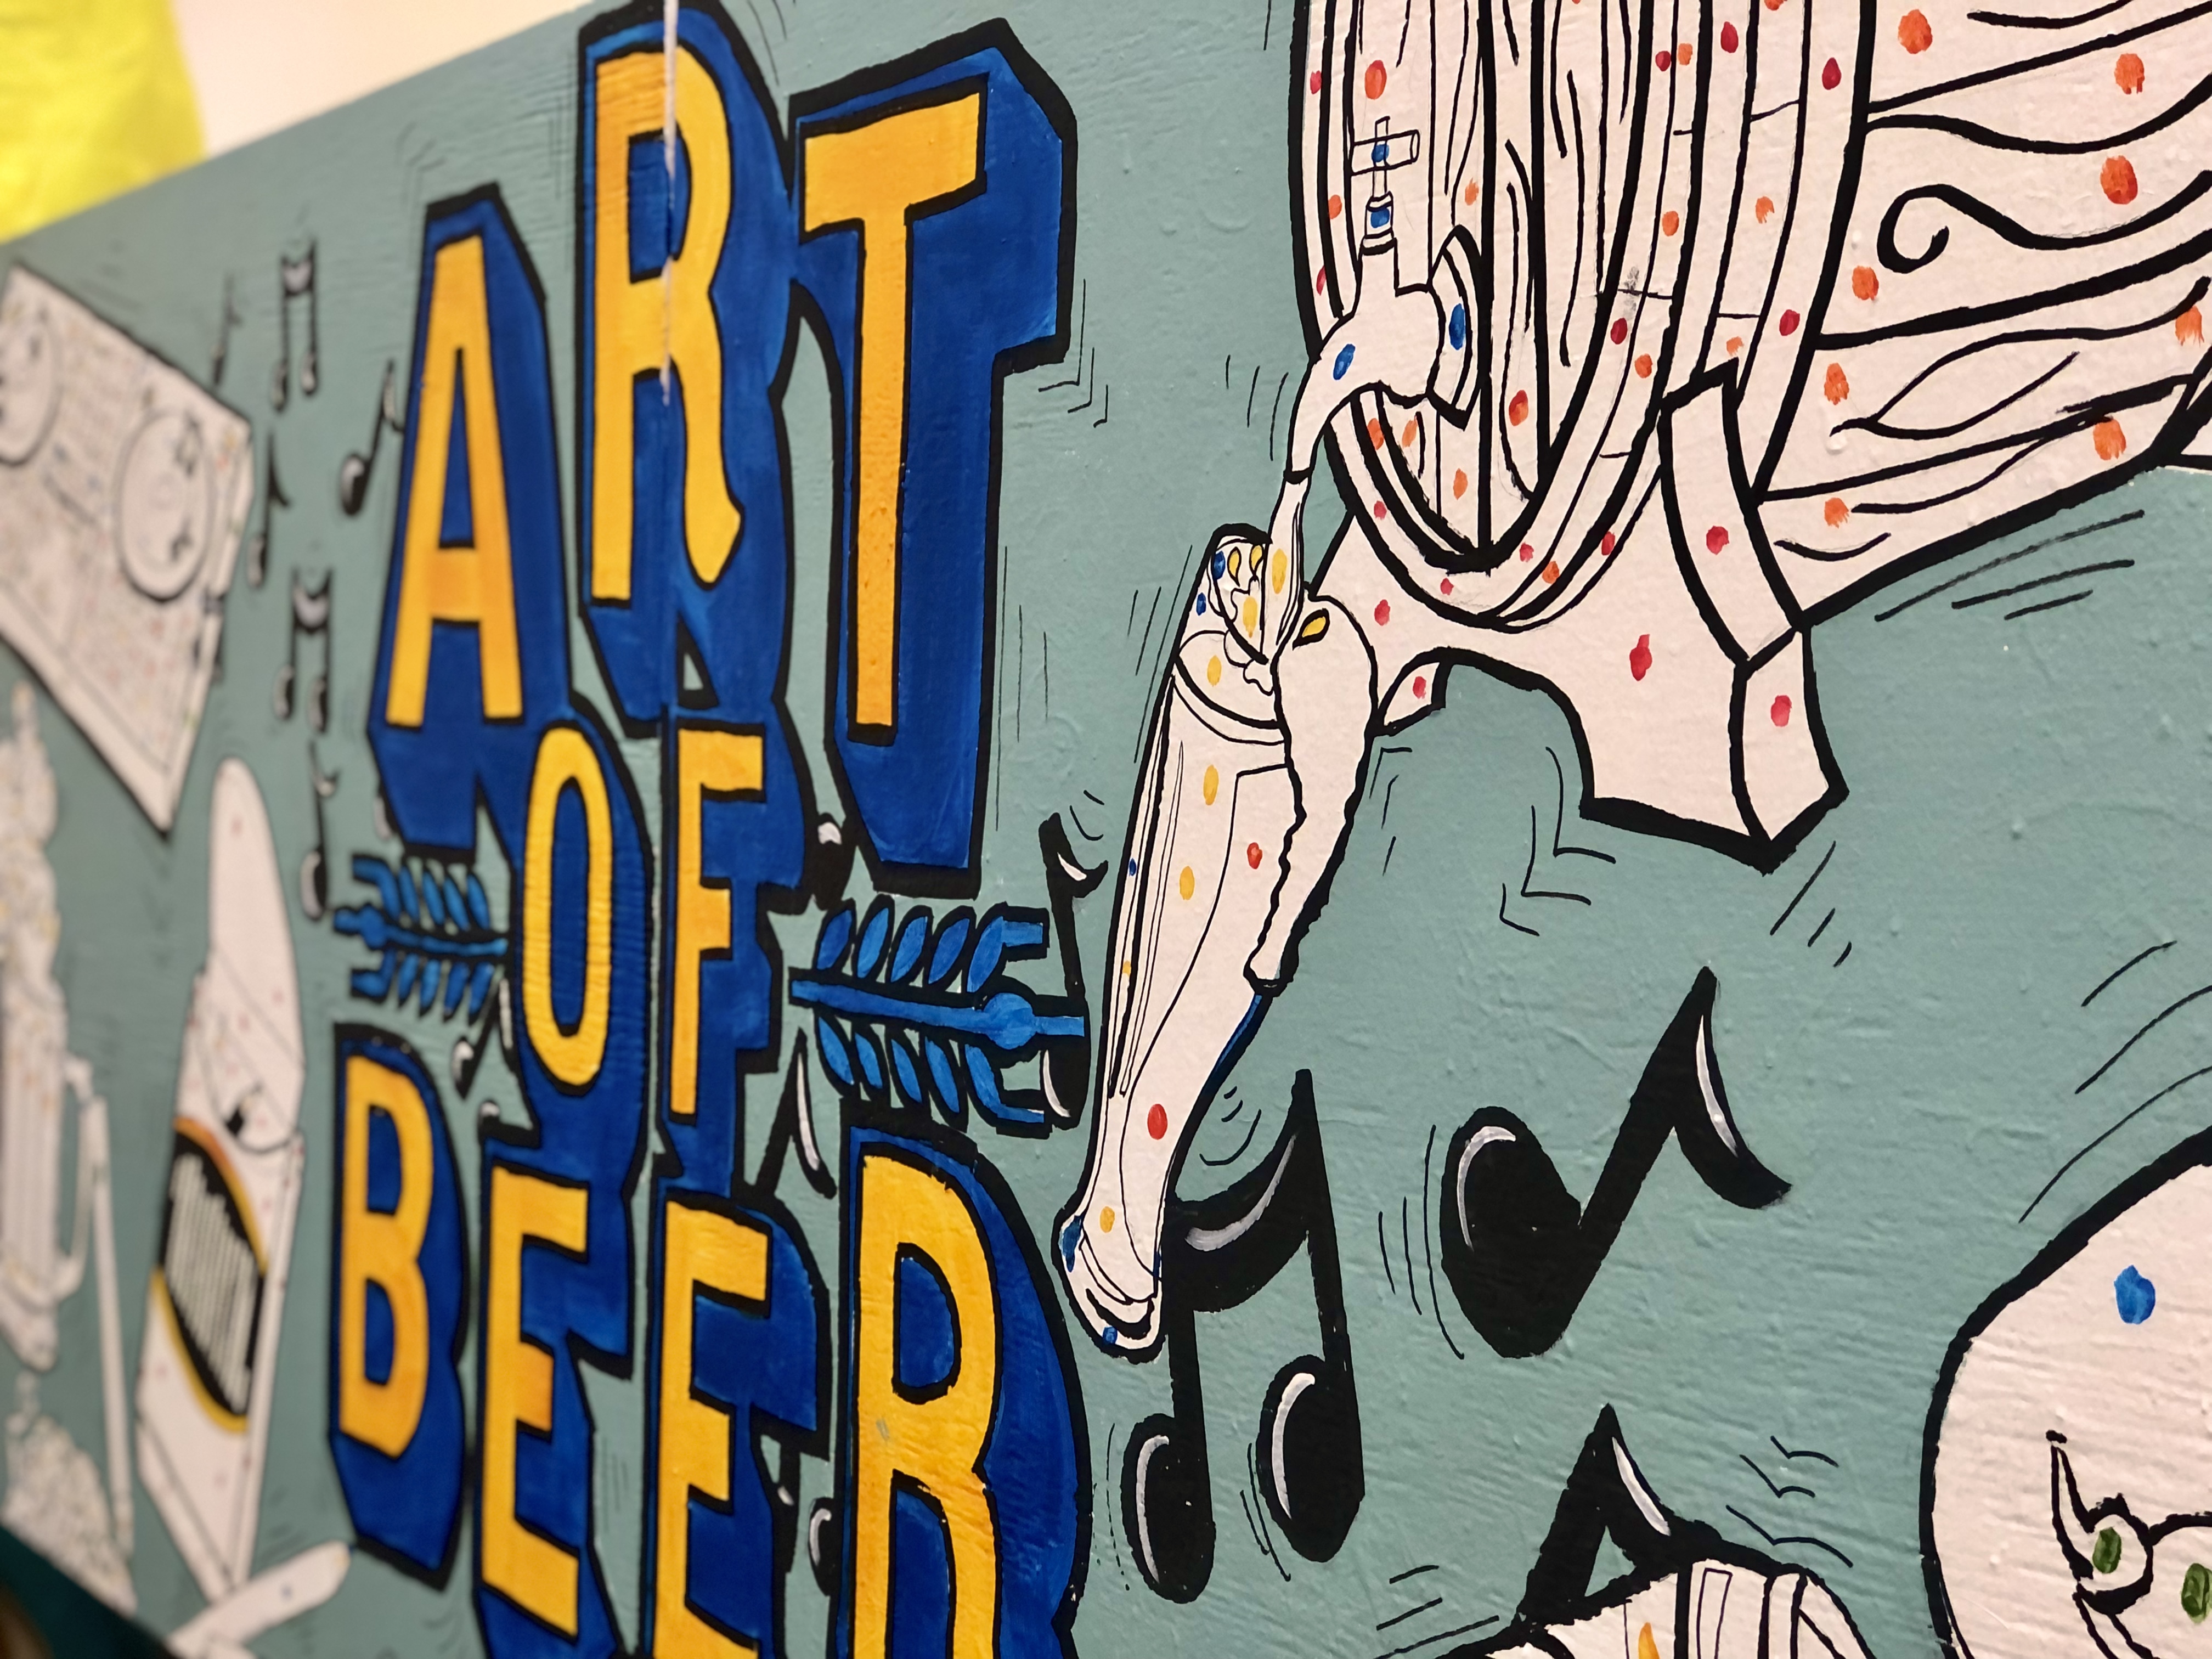 A large mural is painted on a mobile wall. The abckground is a light blue, with Art of Beer painted in the middle in yellow and dark blue. Surrounding the logo is outlines of beer glasses, a turntable, wheat and barley and musical notes.